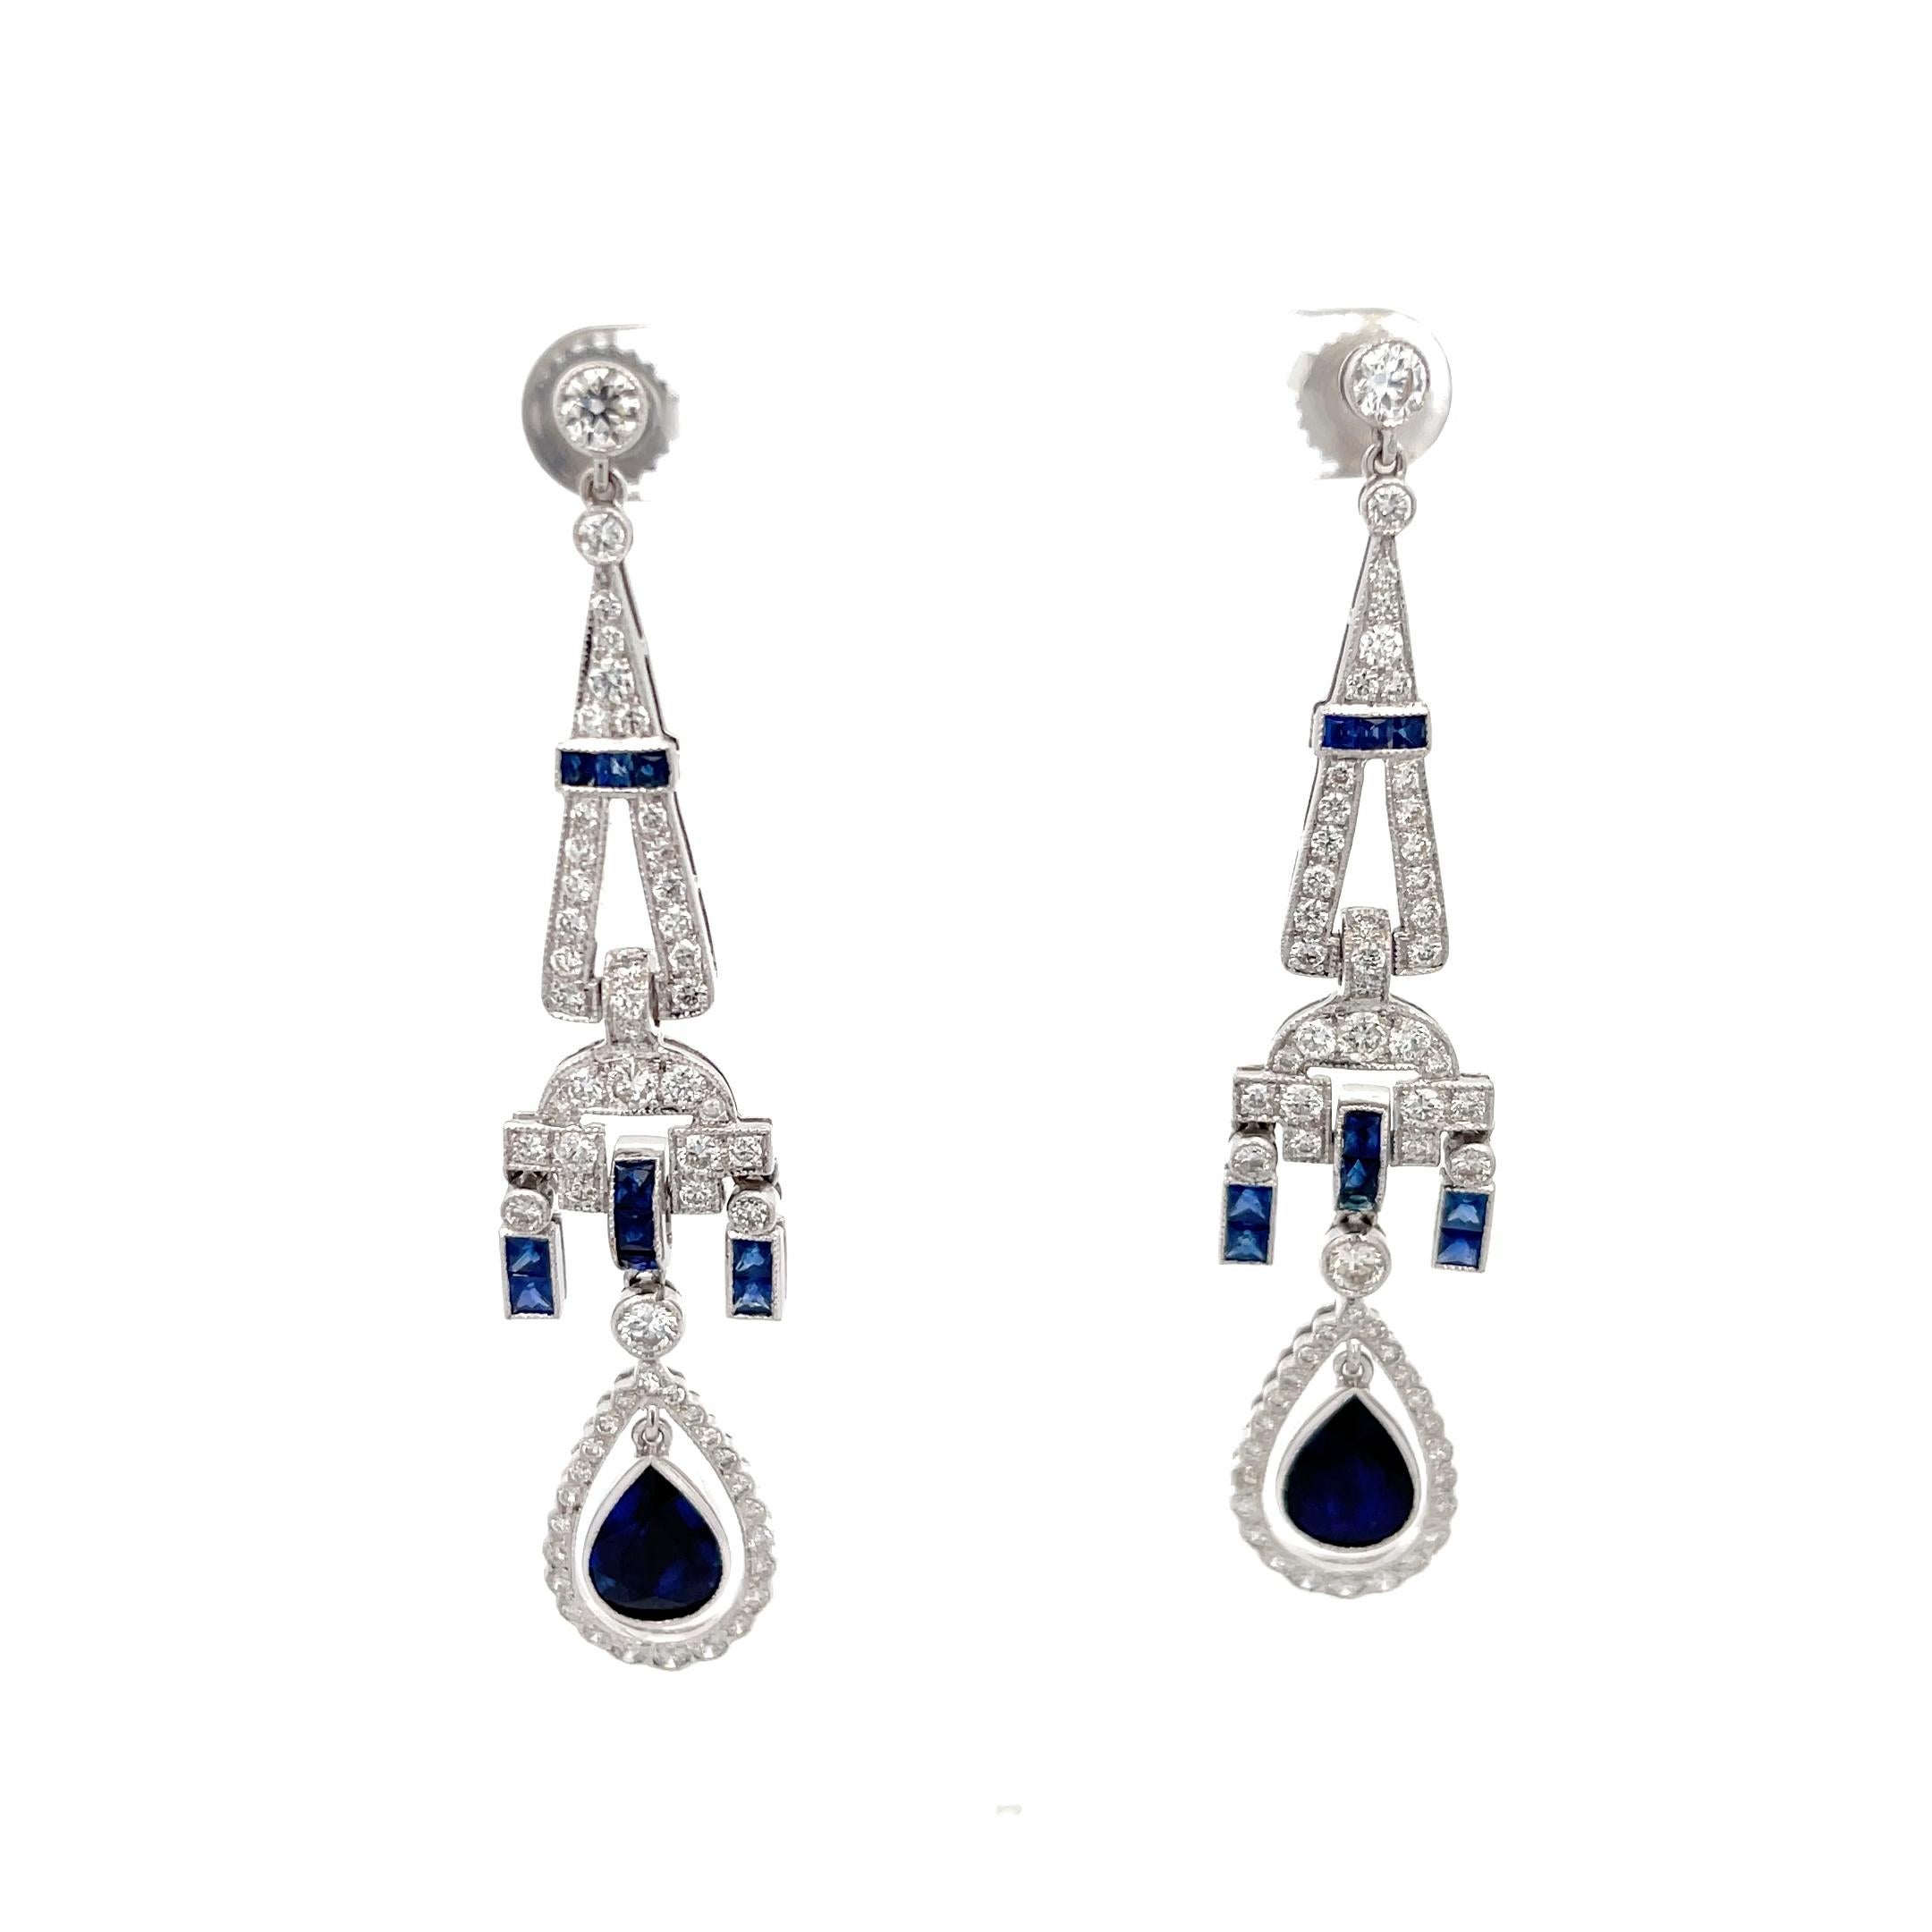 Art Deco Sapphire and Diamond Dangle Earrings in 18K White Gold. The earrings feature near colorless round diamonds, pear shape and square cut sapphires. Comes with GIA report. 
2.75